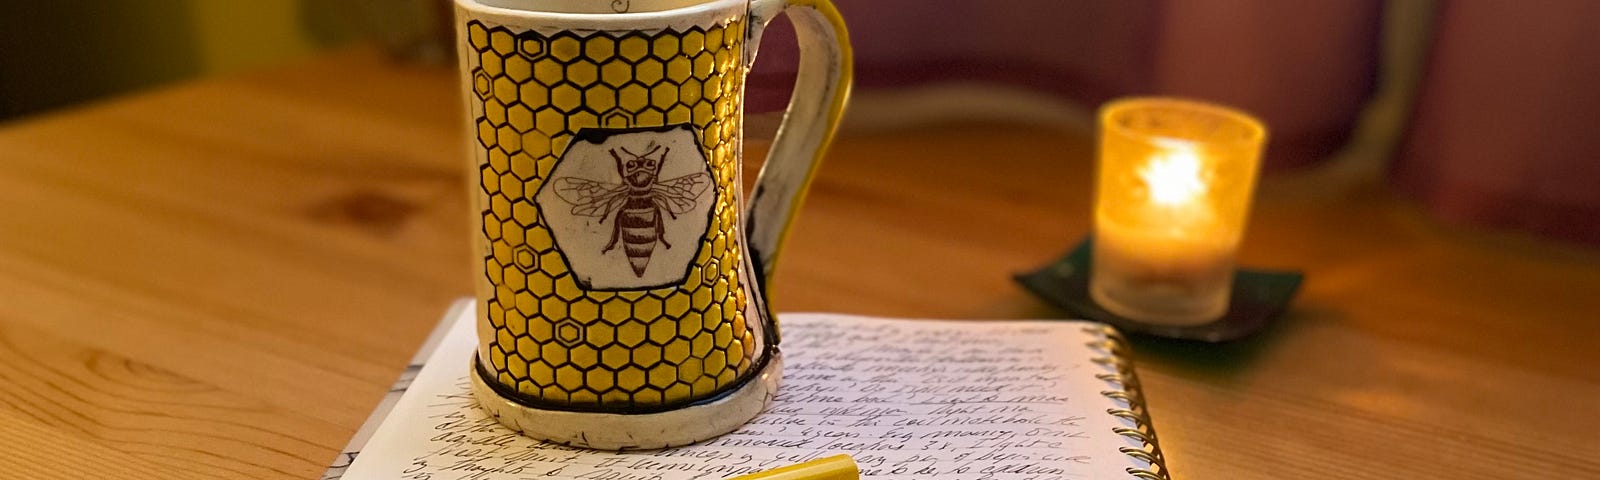 A yellow Lamy pen and a coffee mug with a bee on it, atop a coil notebook filled with cursive writing.